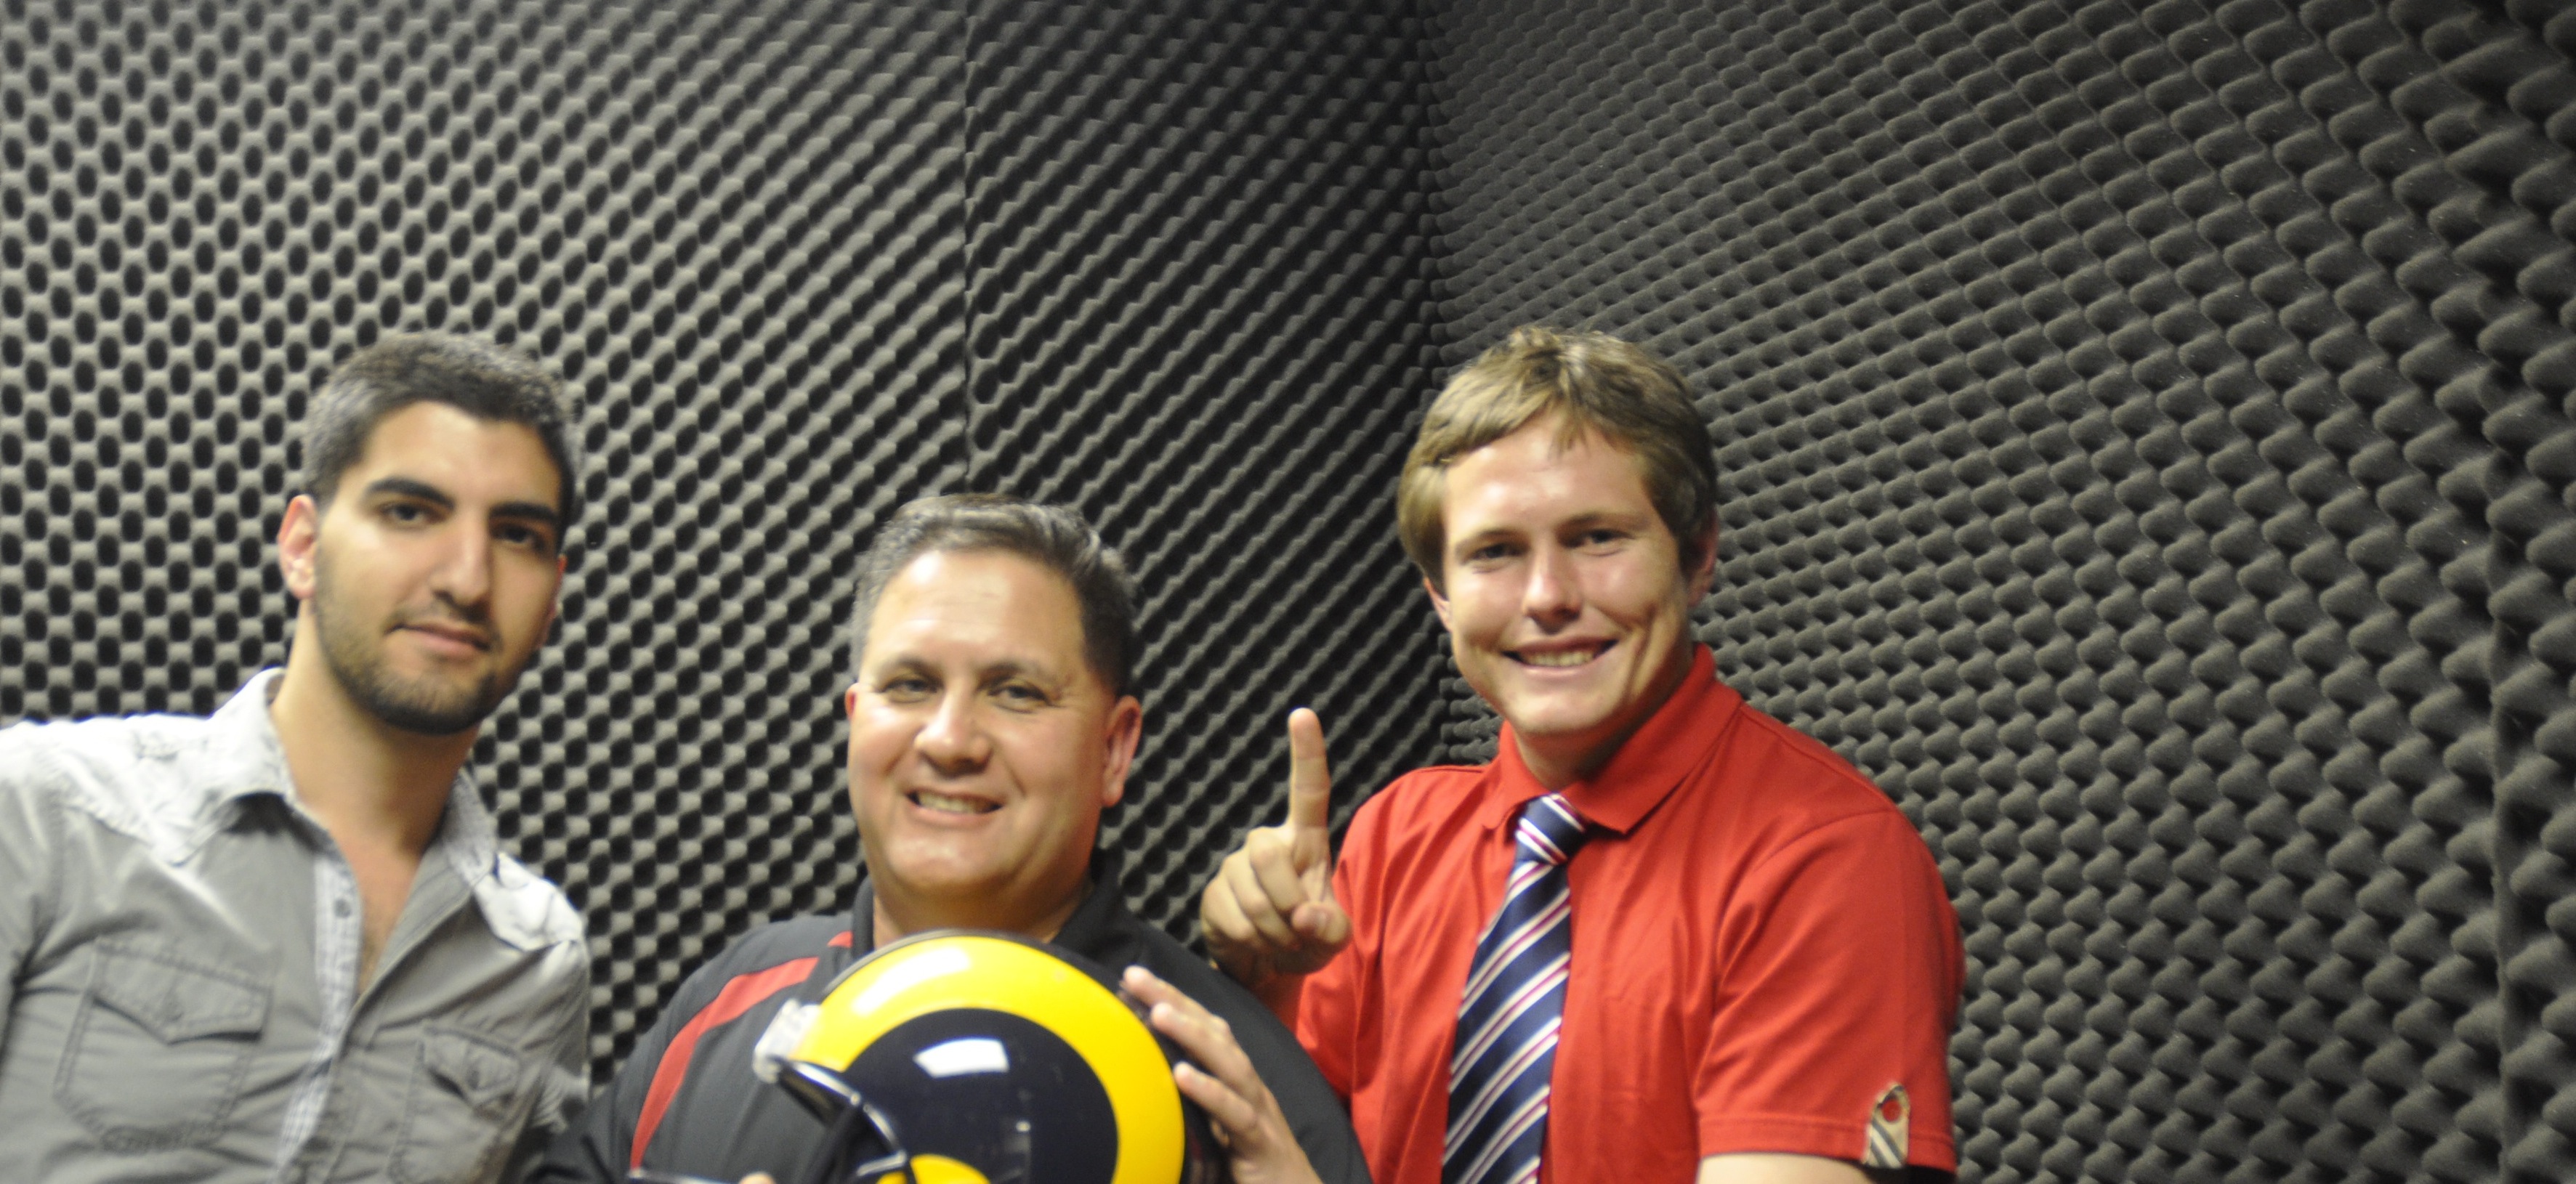 Inside the Game – 09.05.14 – Bringin’ Back the Rams